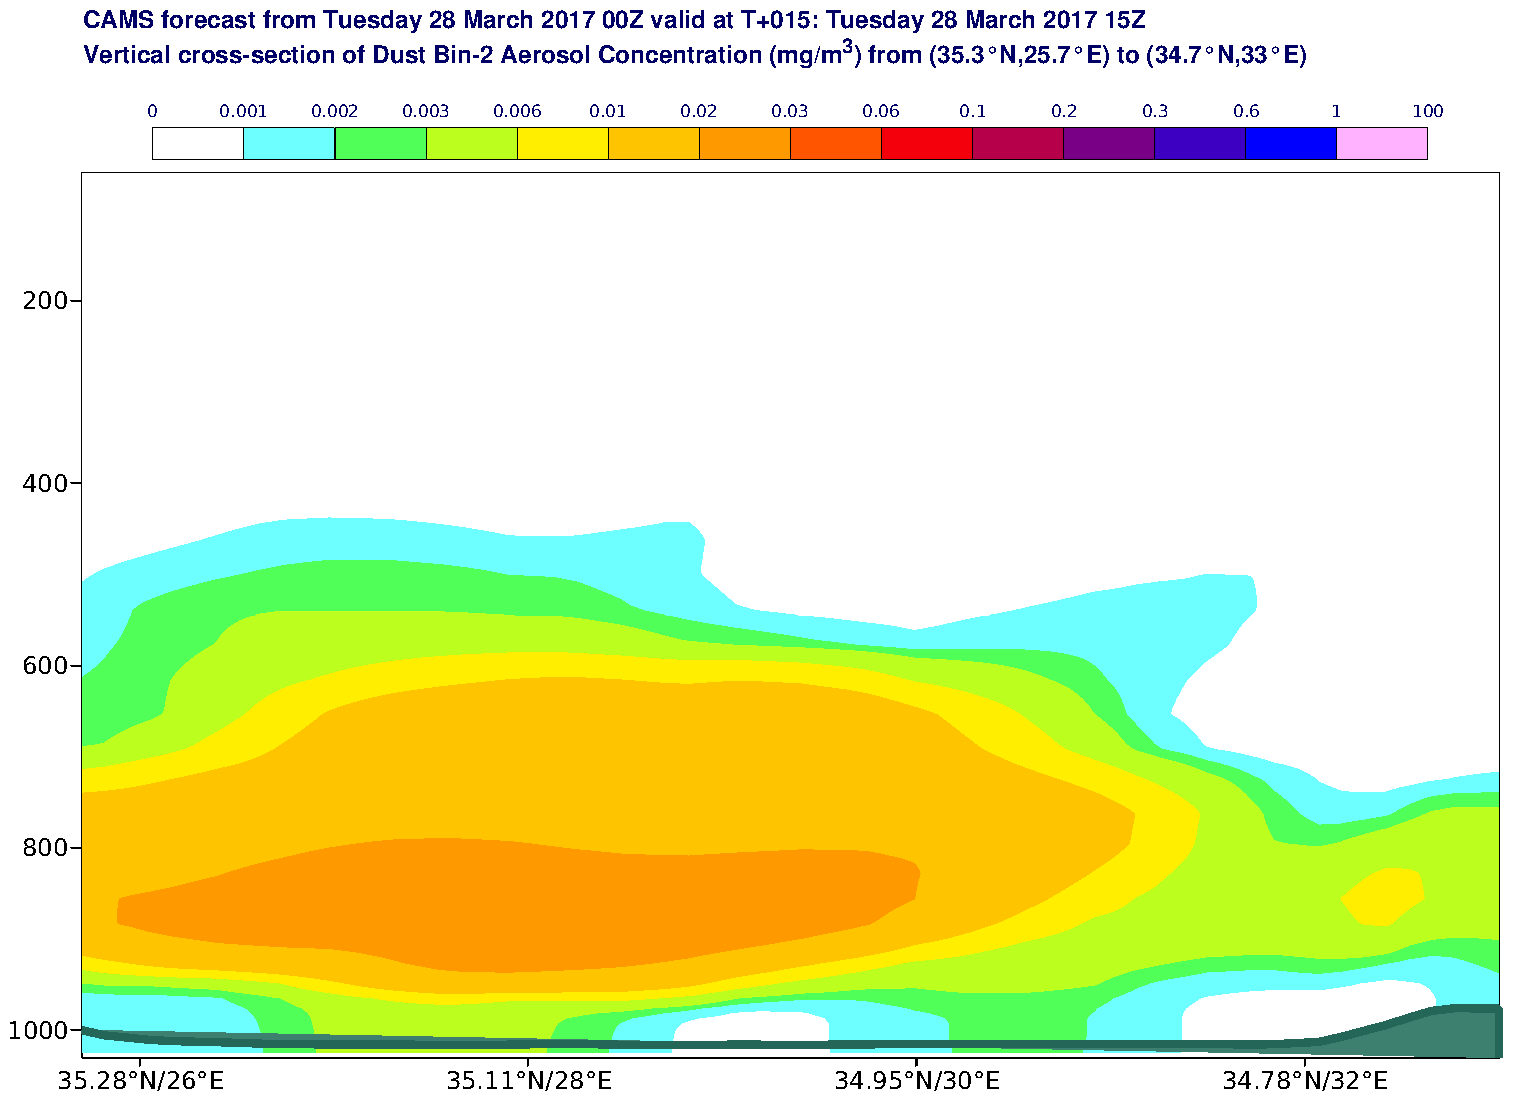 Vertical cross-section of Dust Bin-2 Aerosol Concentration (mg/m3) valid at T15 - 2017-03-28 15:00